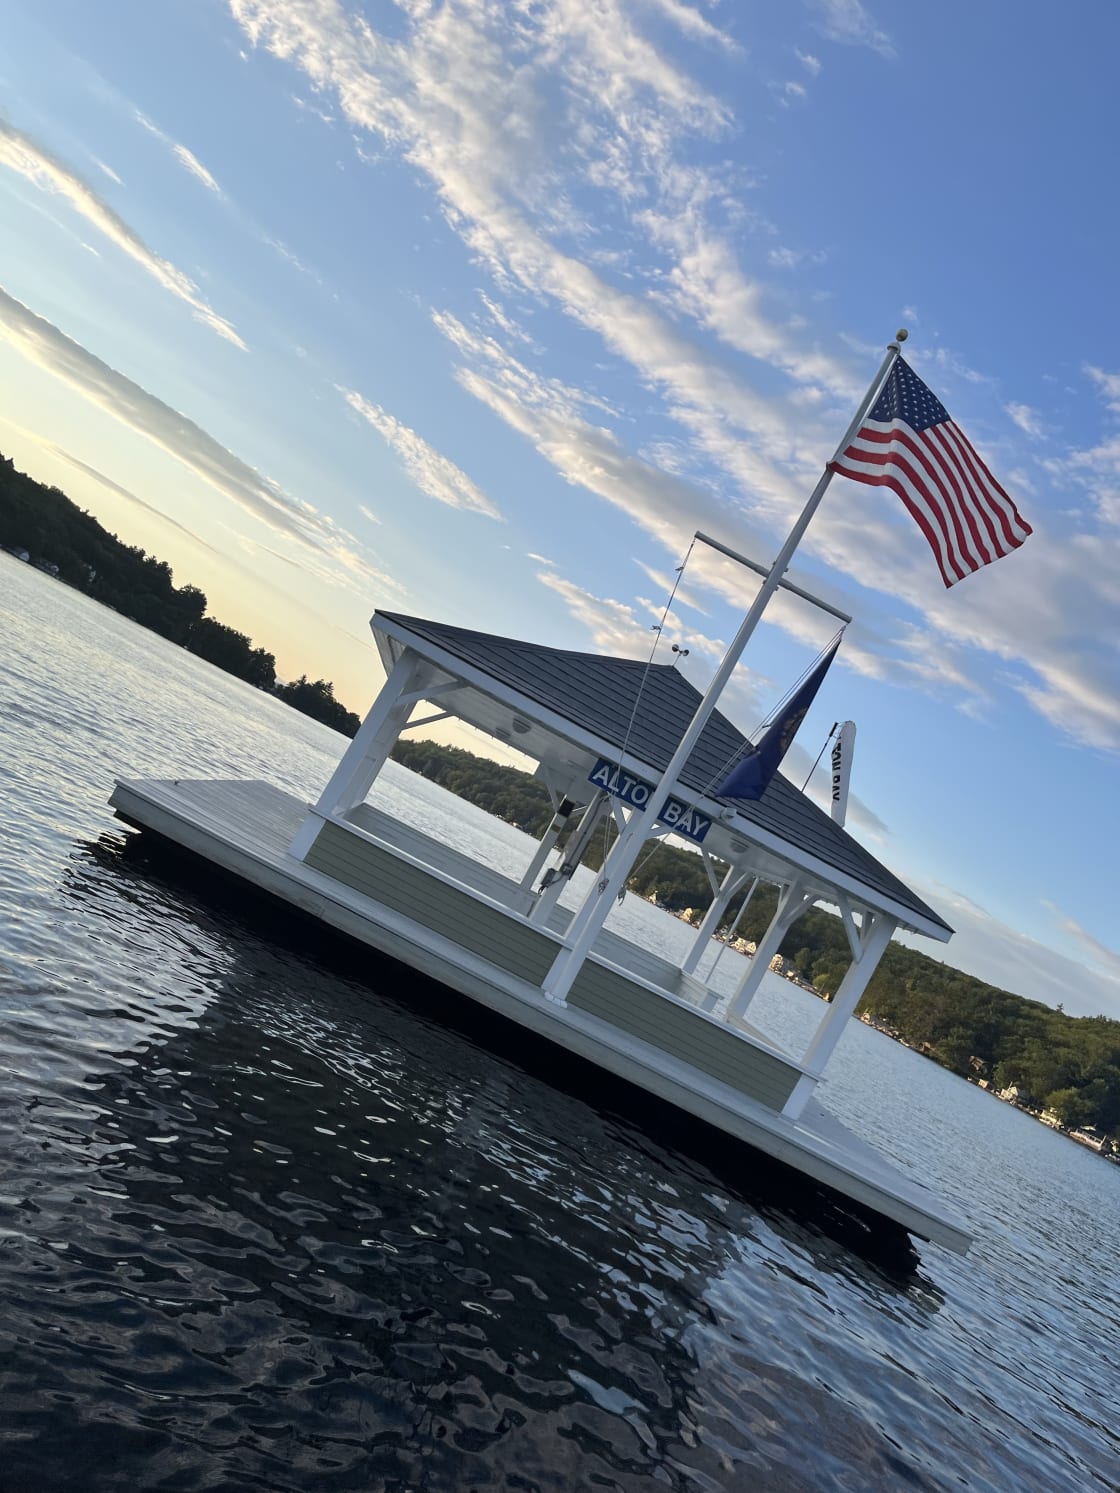 Alton Bay is the quintessential New England small town with many adventures awaiting you. This is Alton Bays signature Pavilion on Lake Winnipesaukee